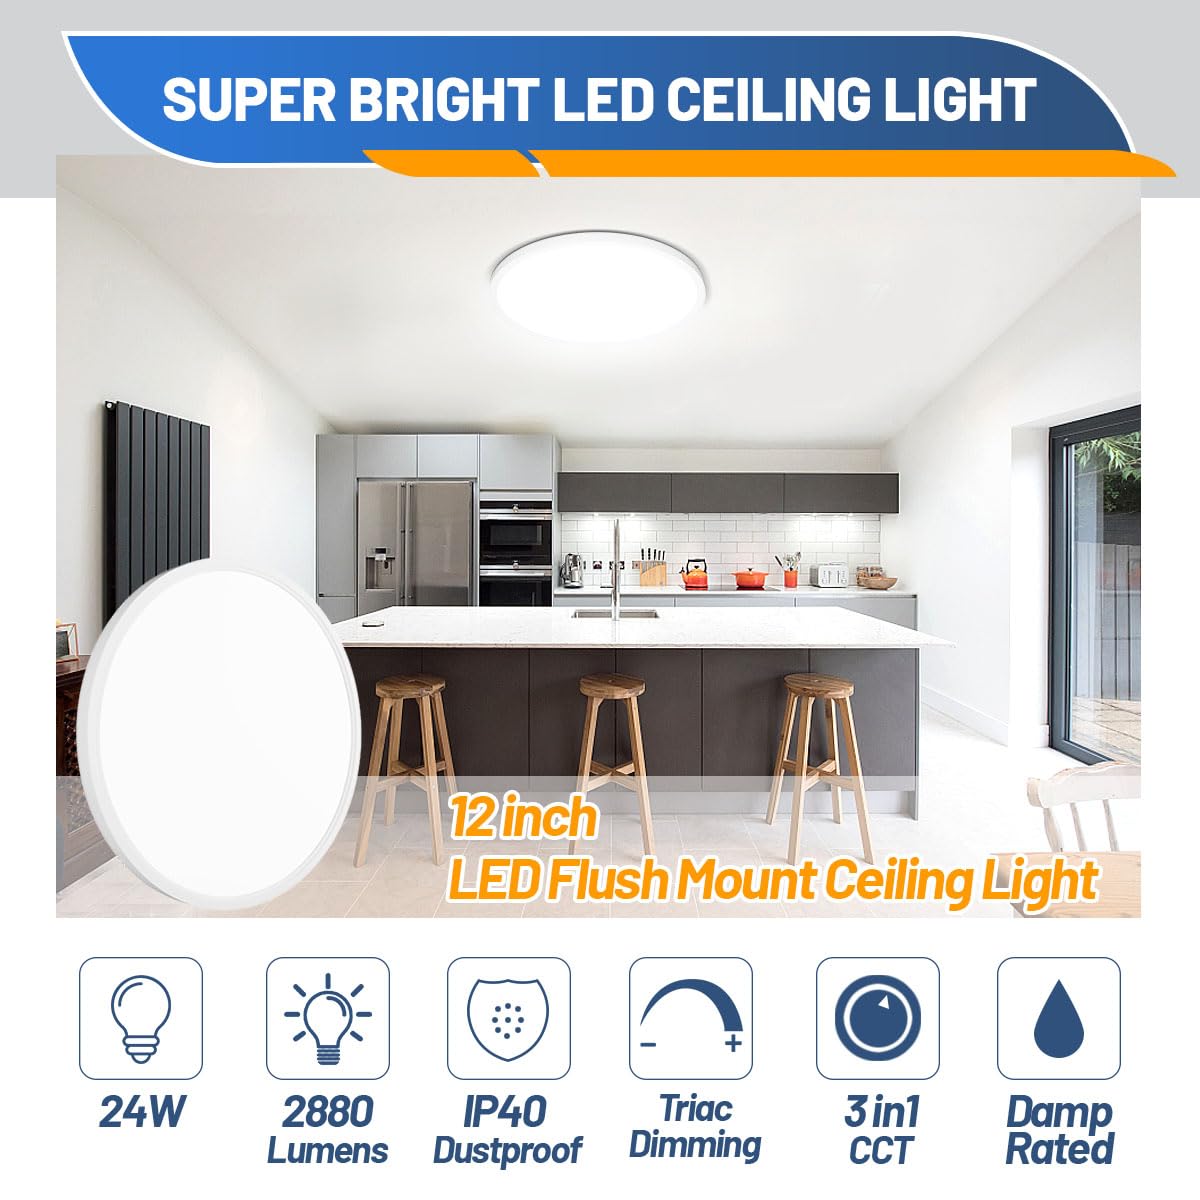 Allsmartlife LED Flush Mount Ceiling Light Fixture, 12inch 24W 2880lm CCT 3000K/4000K/6500K Thin Round Flat Panel Light Surface Mount for Kitchen, Bedroom, Laundry. Dimmable Ceiling Lamp